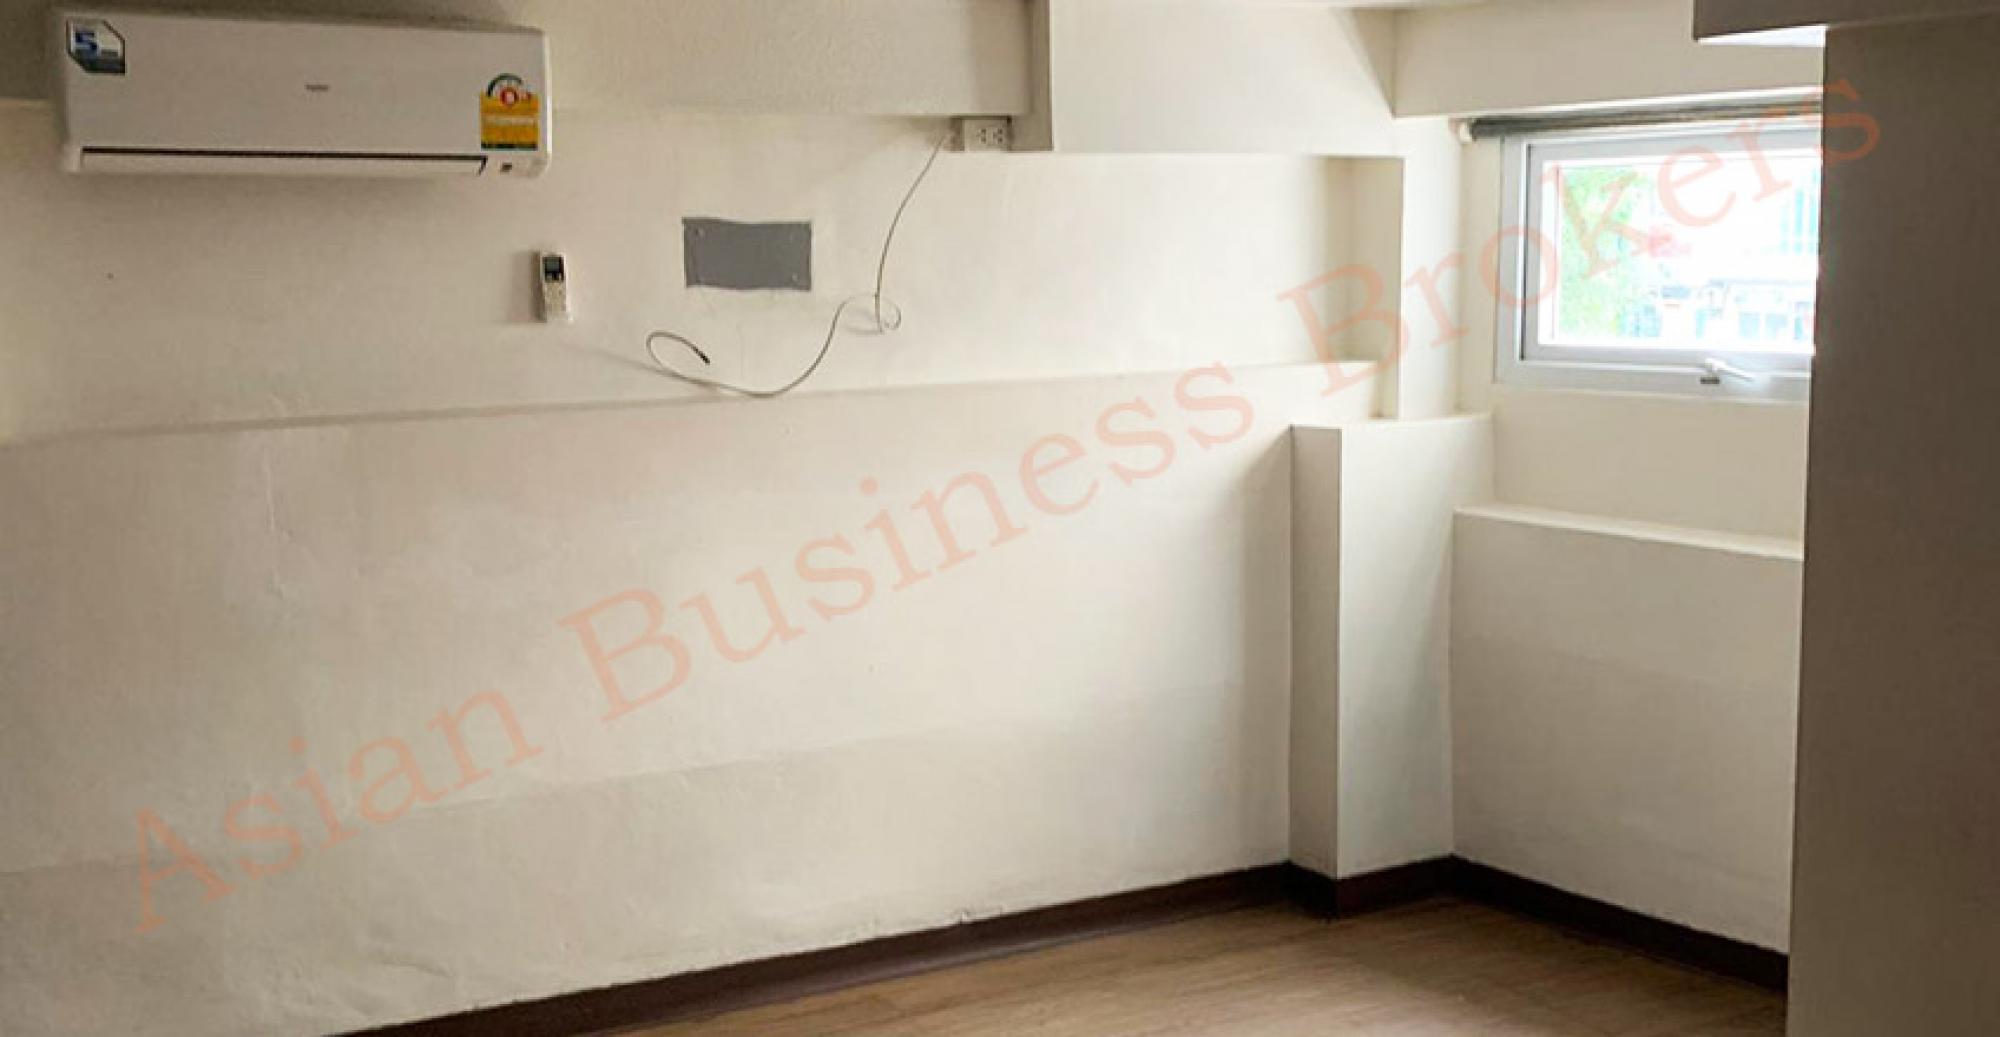 Picture of Commercial Building For Rent in Bangkok, Bangkok, Thailand